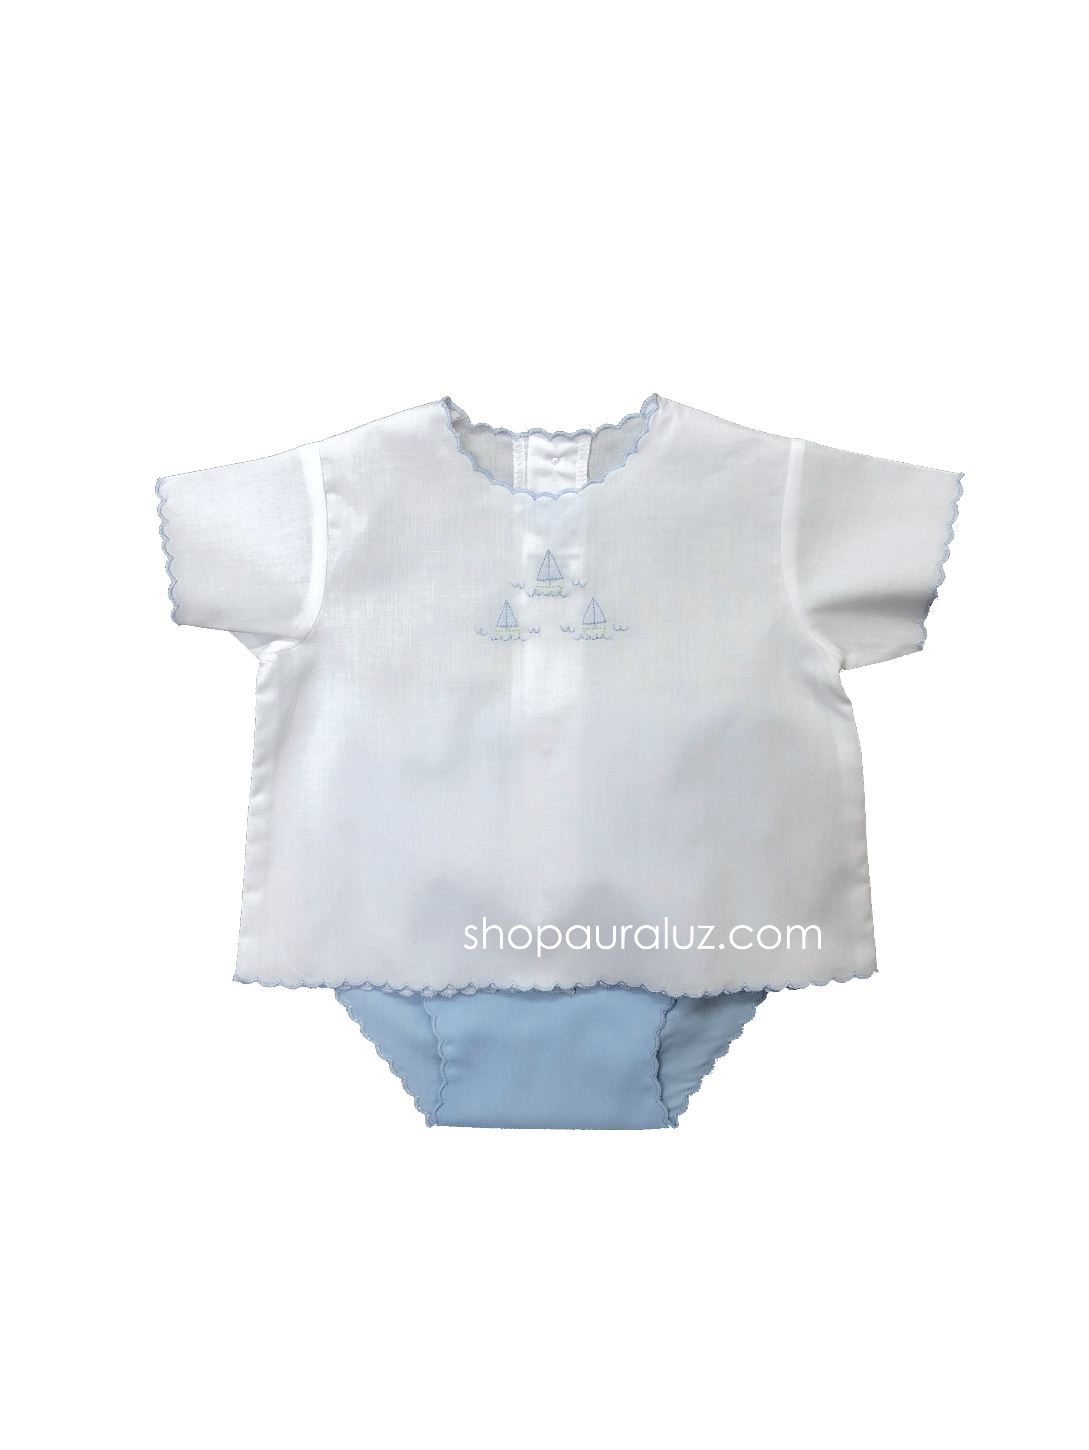 Auraluz 2pc Diaper Set...White/blue with blue scallops and embroidered boats